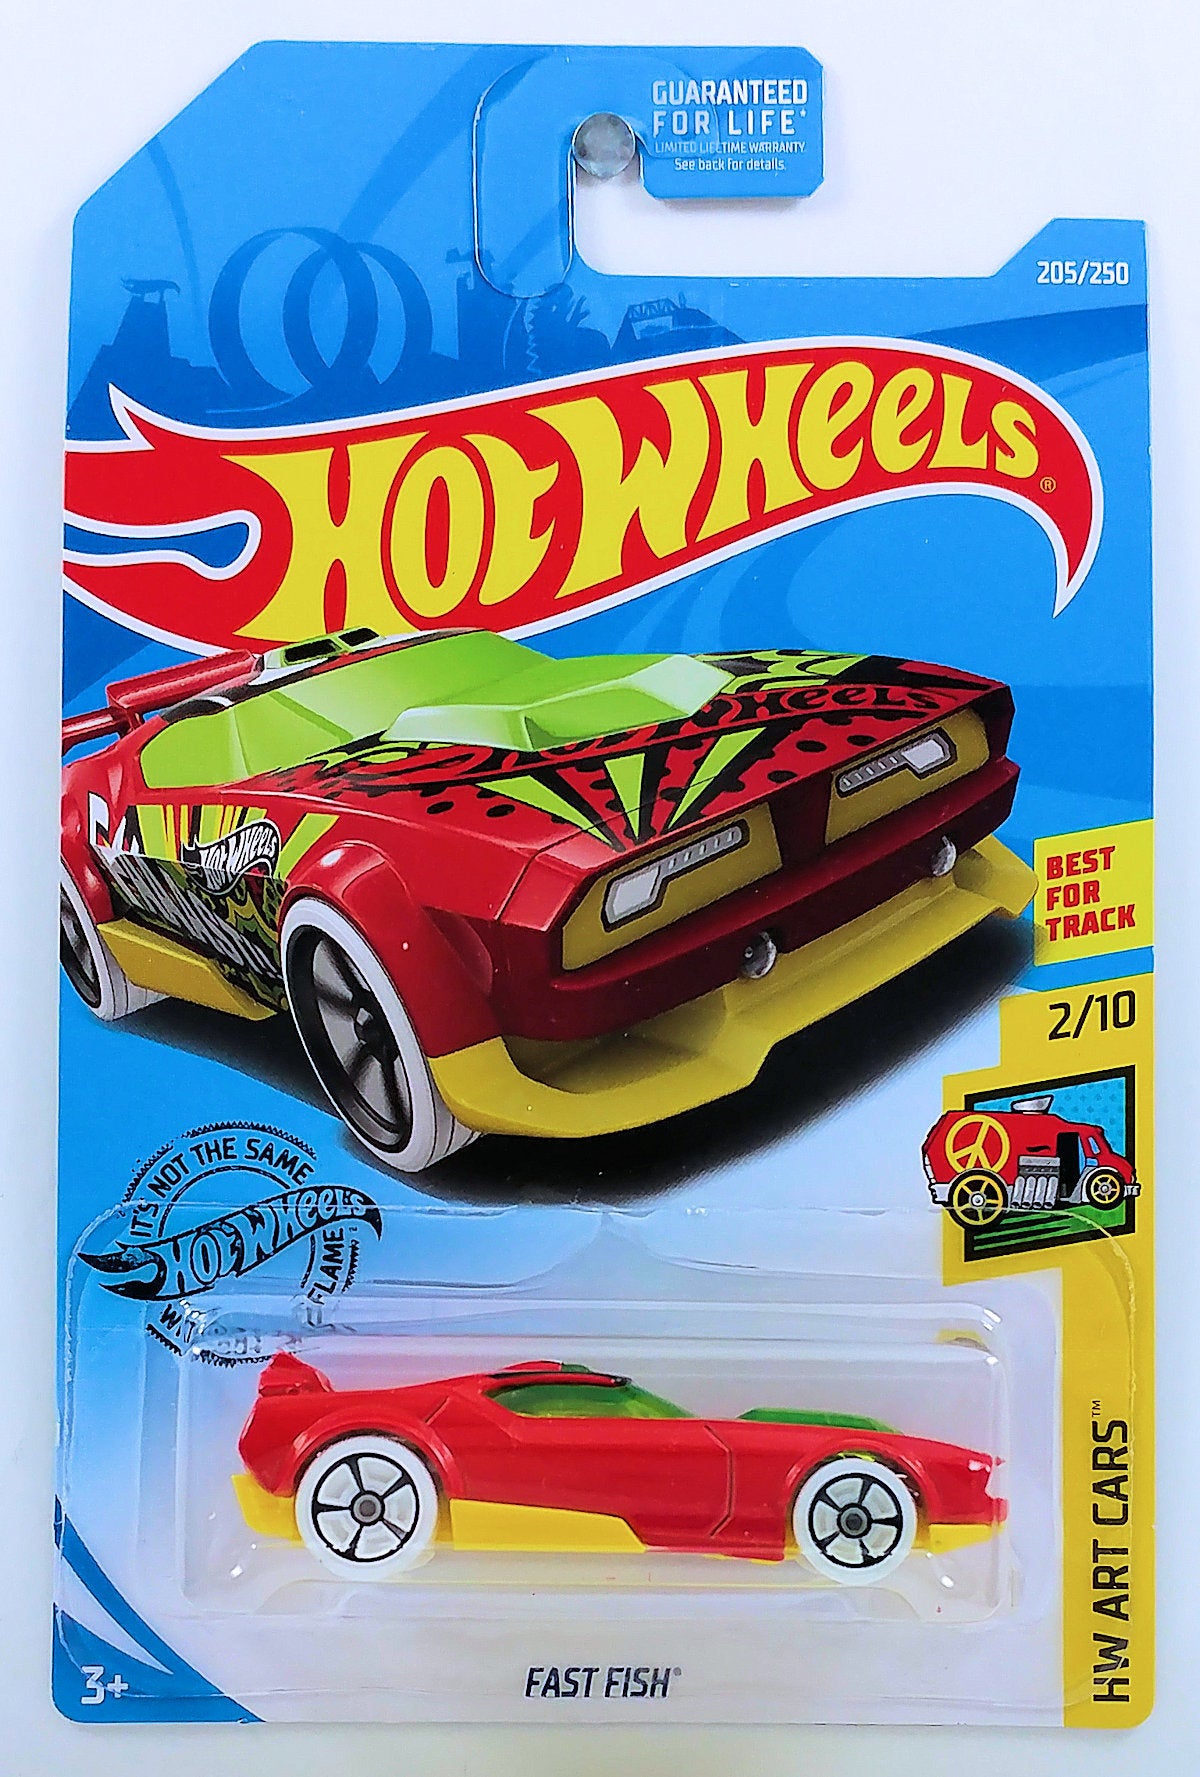 Hot Wheels 2019 - Collector # 205/250 - HW Art Cars 2/10 - Fast Fish - Red - USA Card - ERROR No Side Tampo